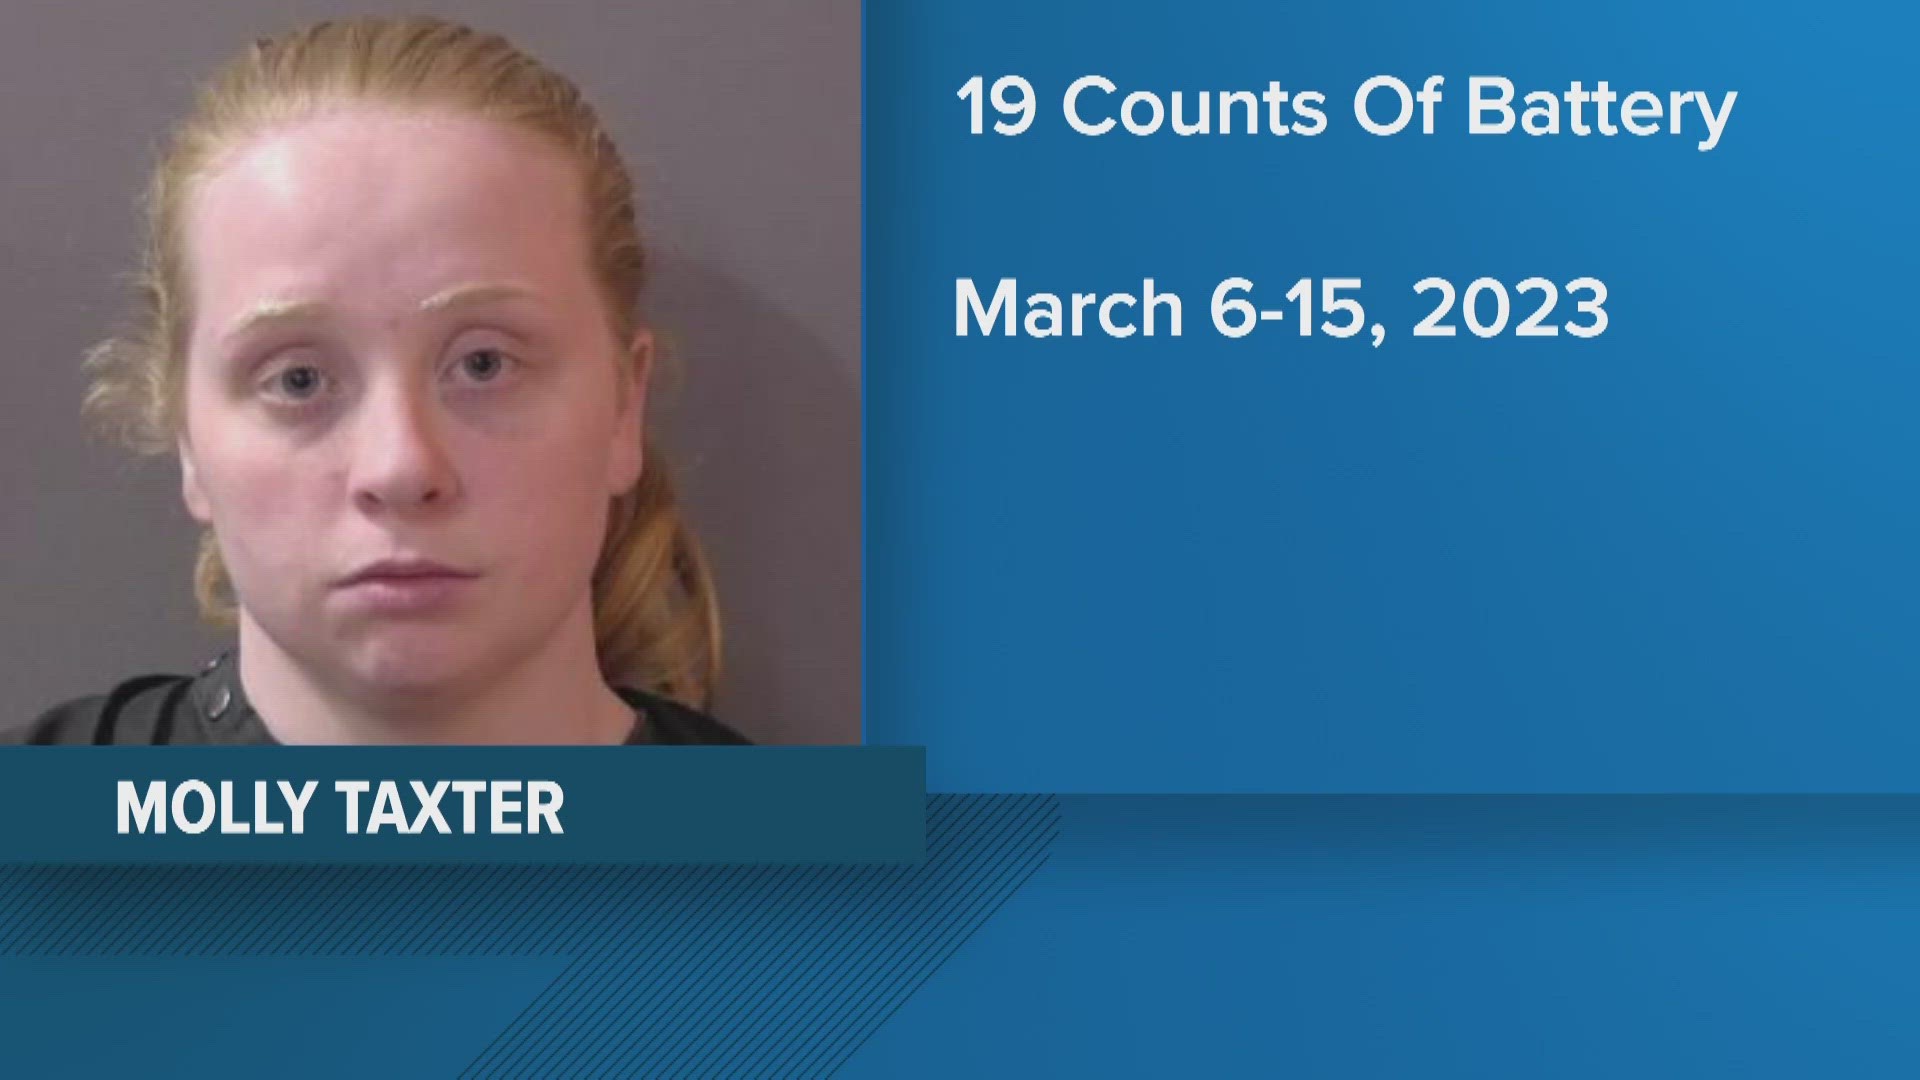 Molly Taxter faces 19 counts of battery. Video allegedly showed her punishing and abusing children.